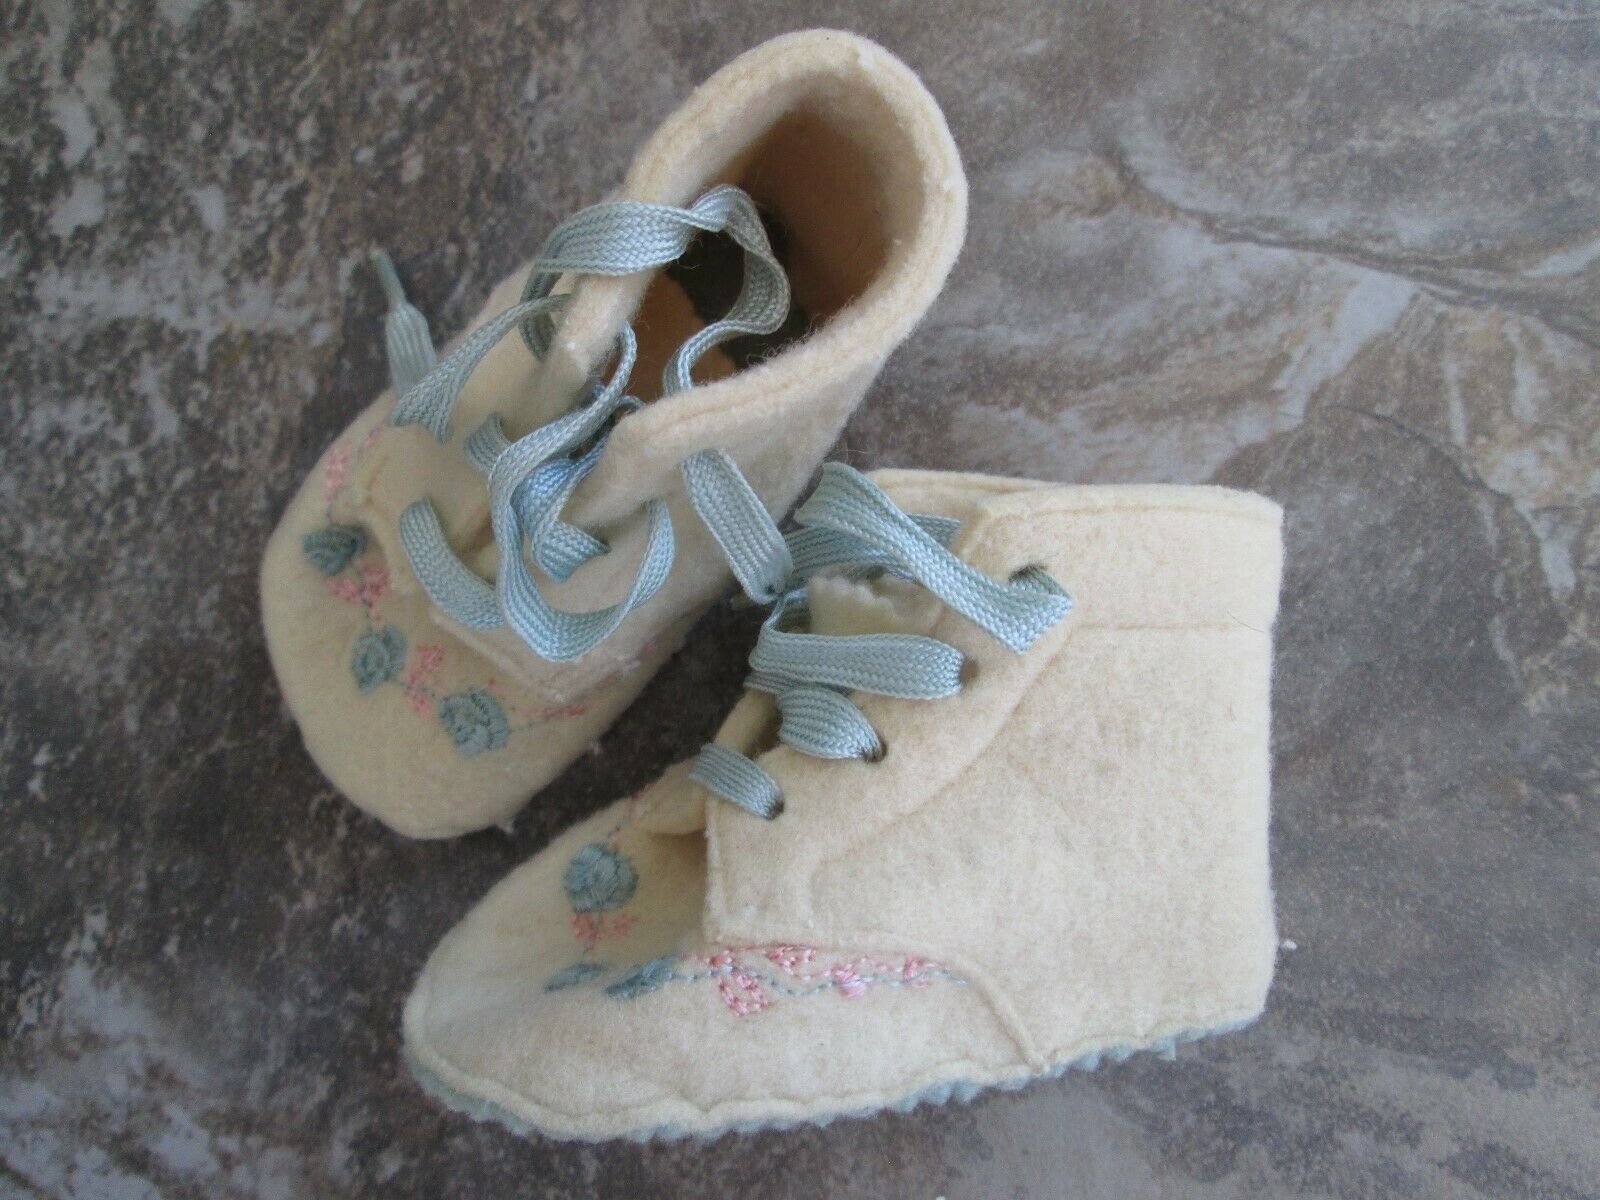 Vtg Handmade Baby Booties Boiled Wool Felted Boots Blue Pink Floral Tie Precious